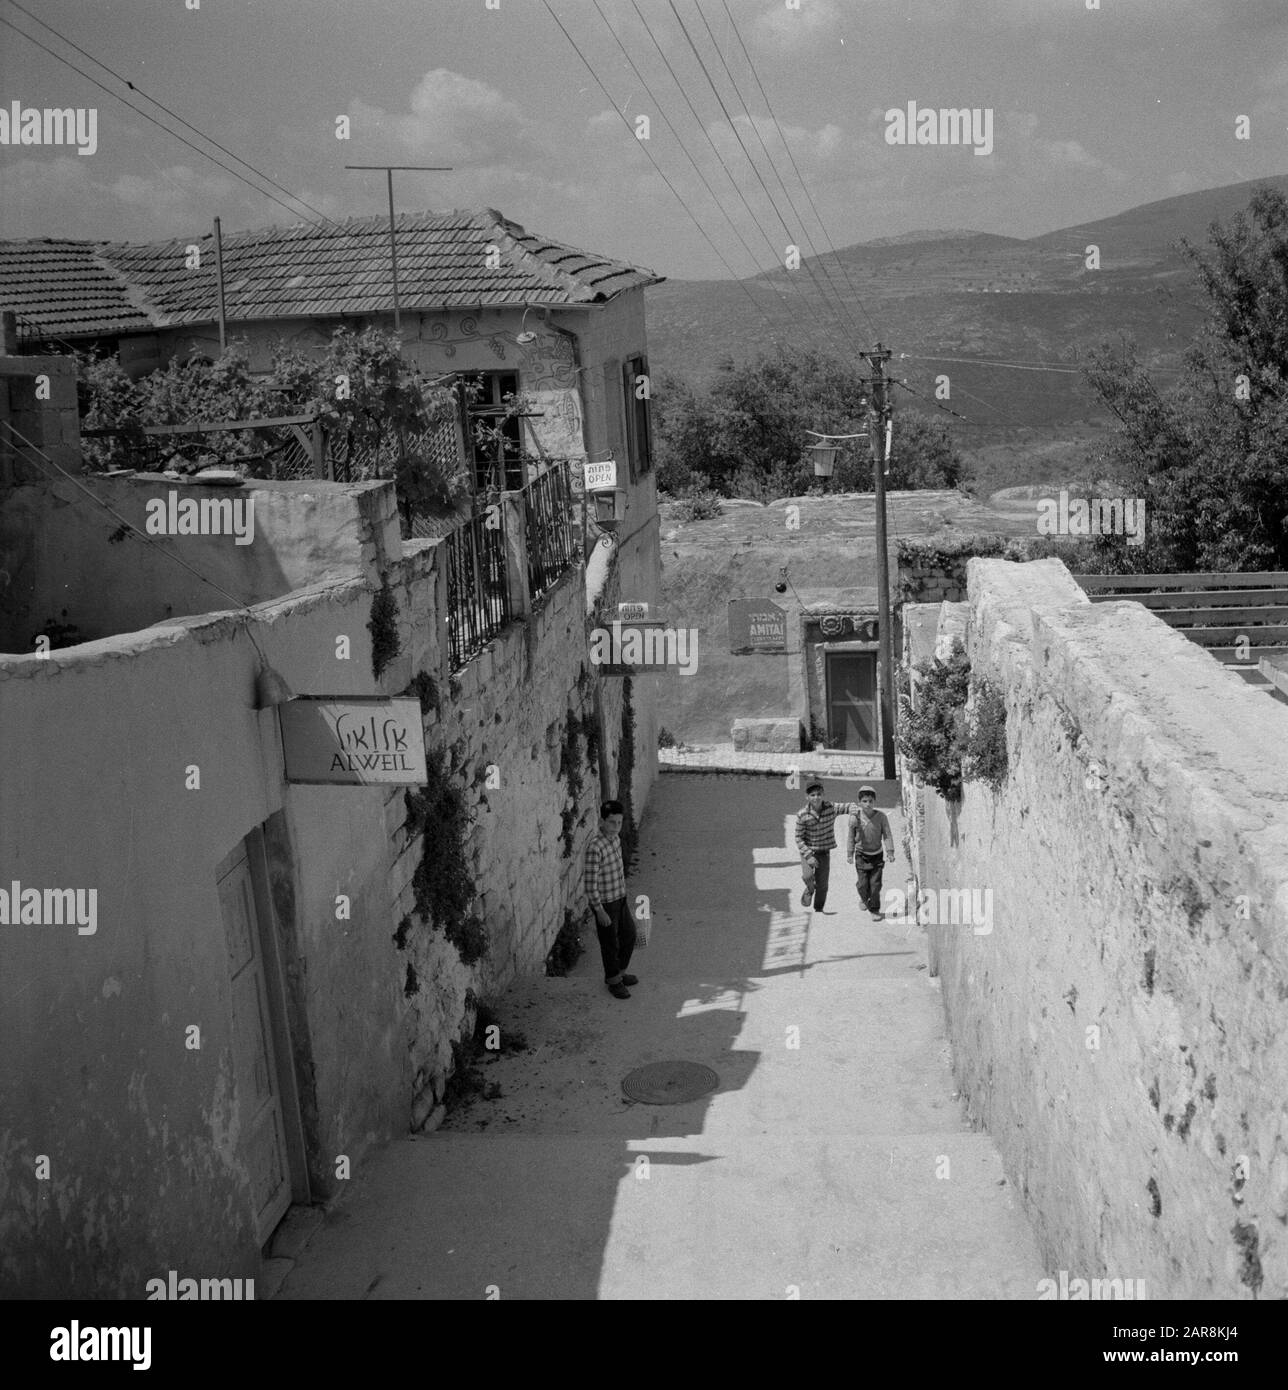 Street image in the artists' colony near Safad (Safed) with the studios of the artist Alweil, Arieth Merzer and Amitai with a view of the surrounding hills Date: undated Location: Israel, Safad, Safed Keywords: artists, workshops, hills, artists' colonies, billboards, street images Stock Photo